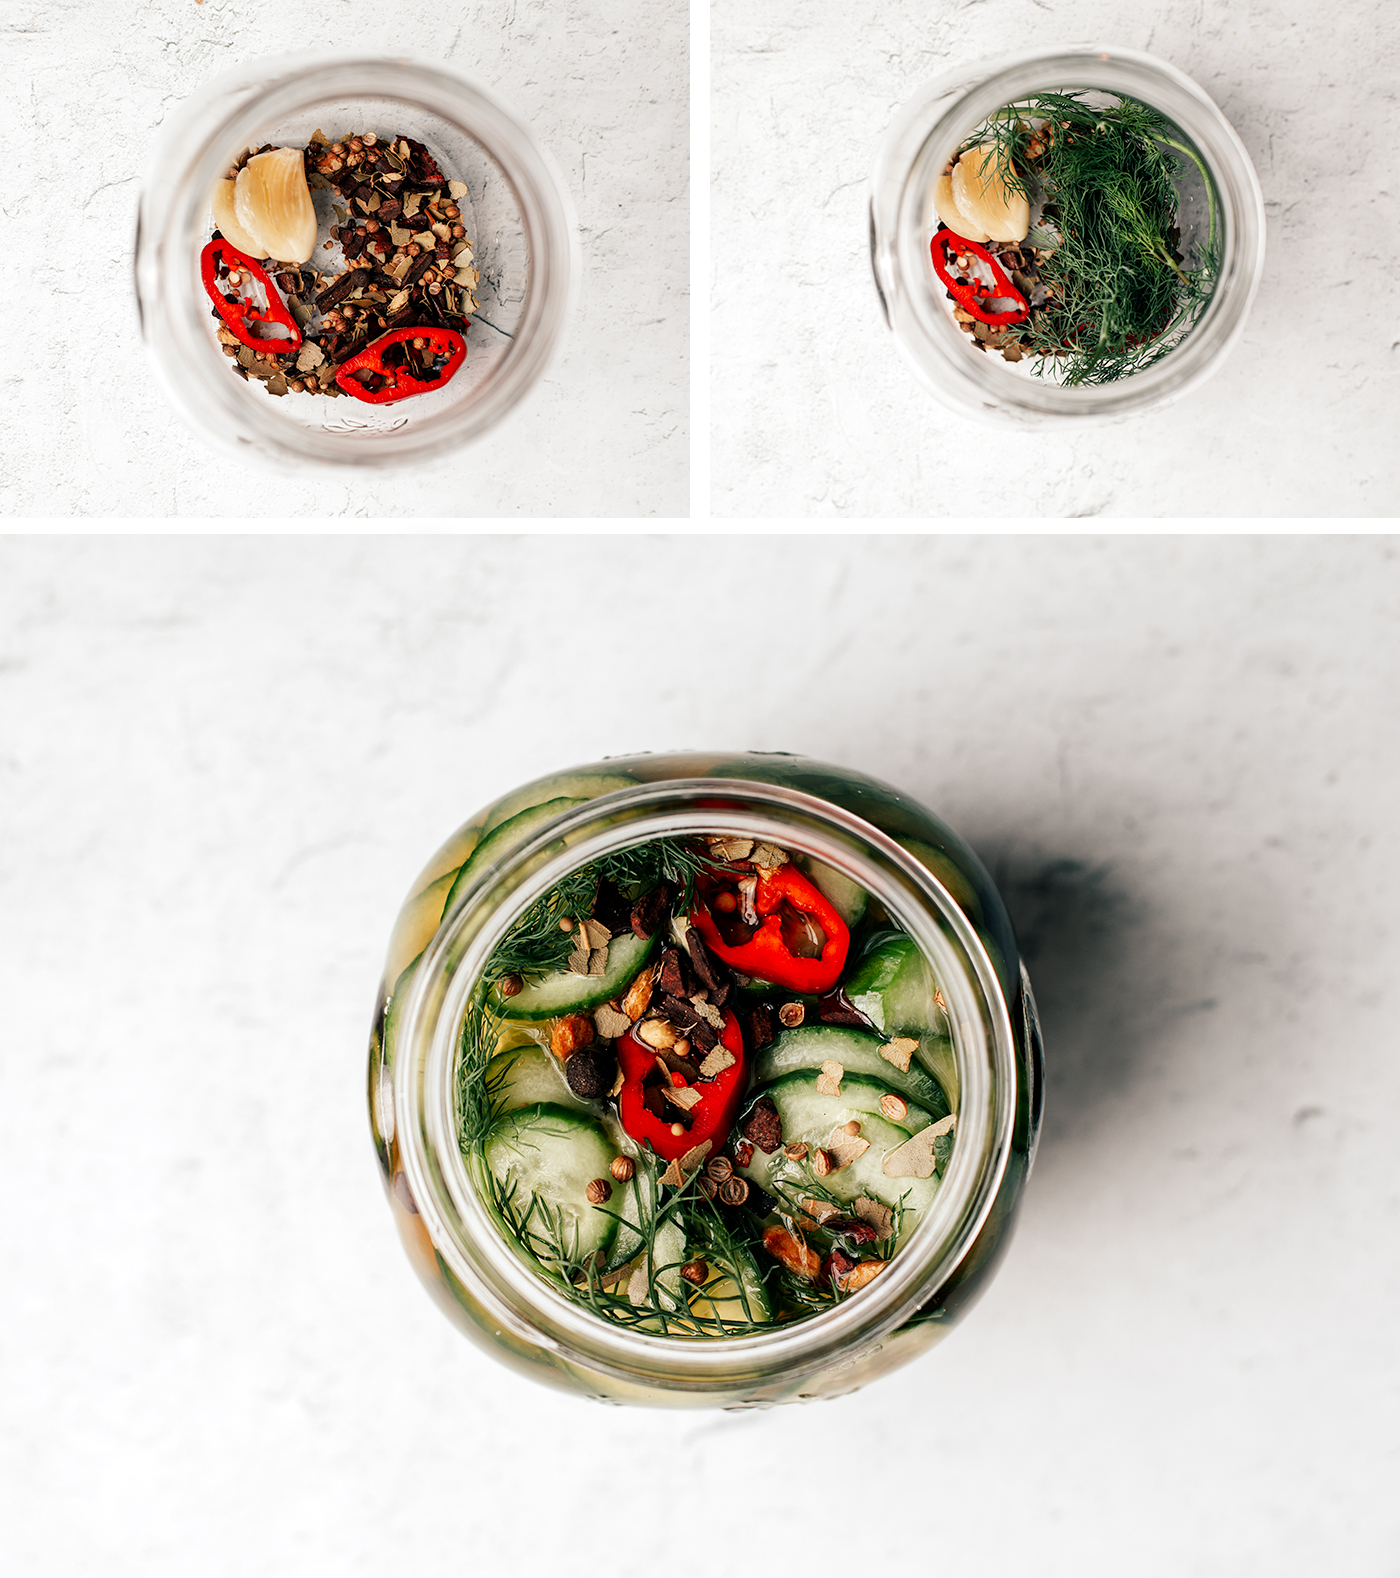 Process shots of filling jar with pickling spices, herbs, and then pickles and brine.